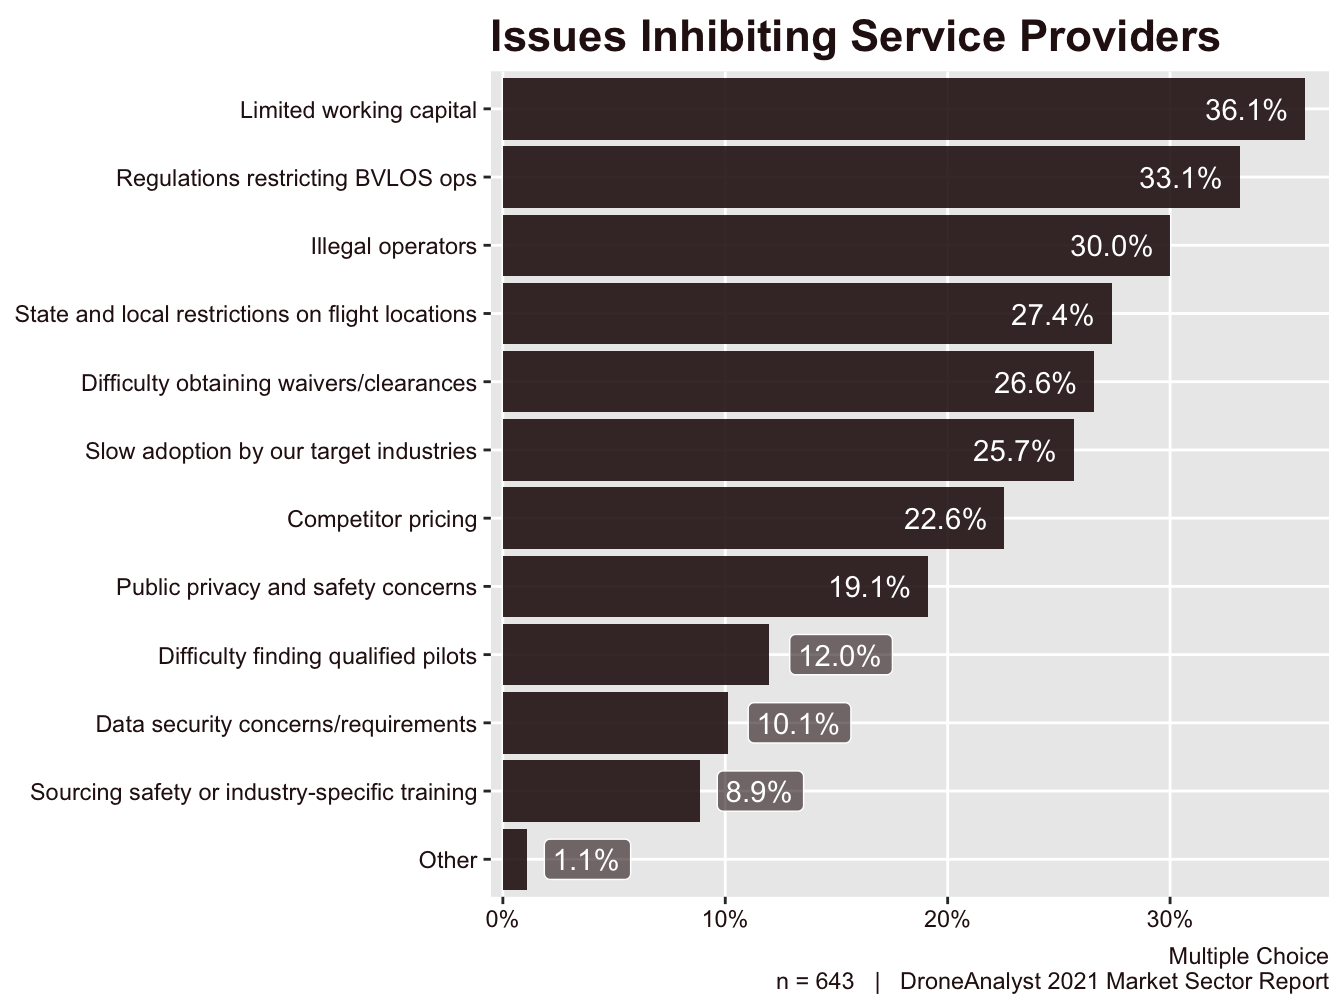 Issues Inhibiting Service Providers